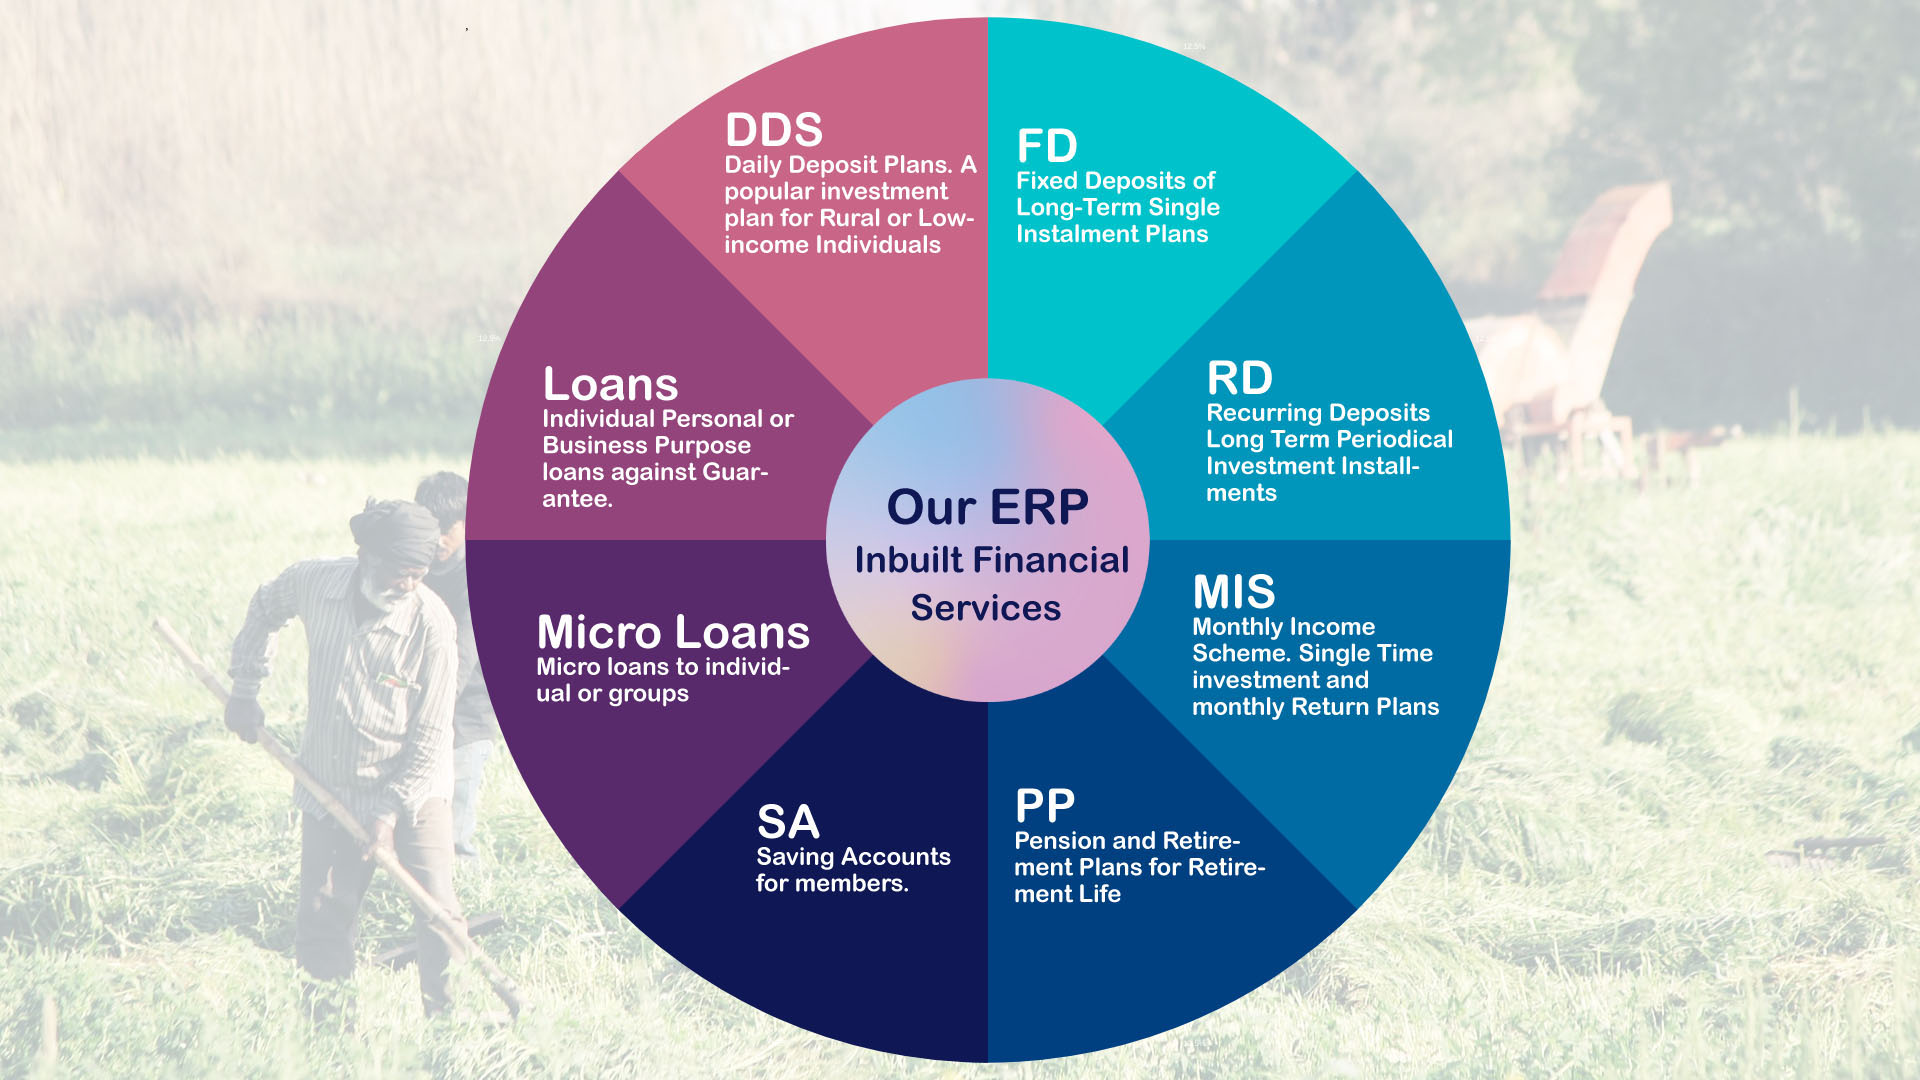 One ERP caters your all financial Offering to your members